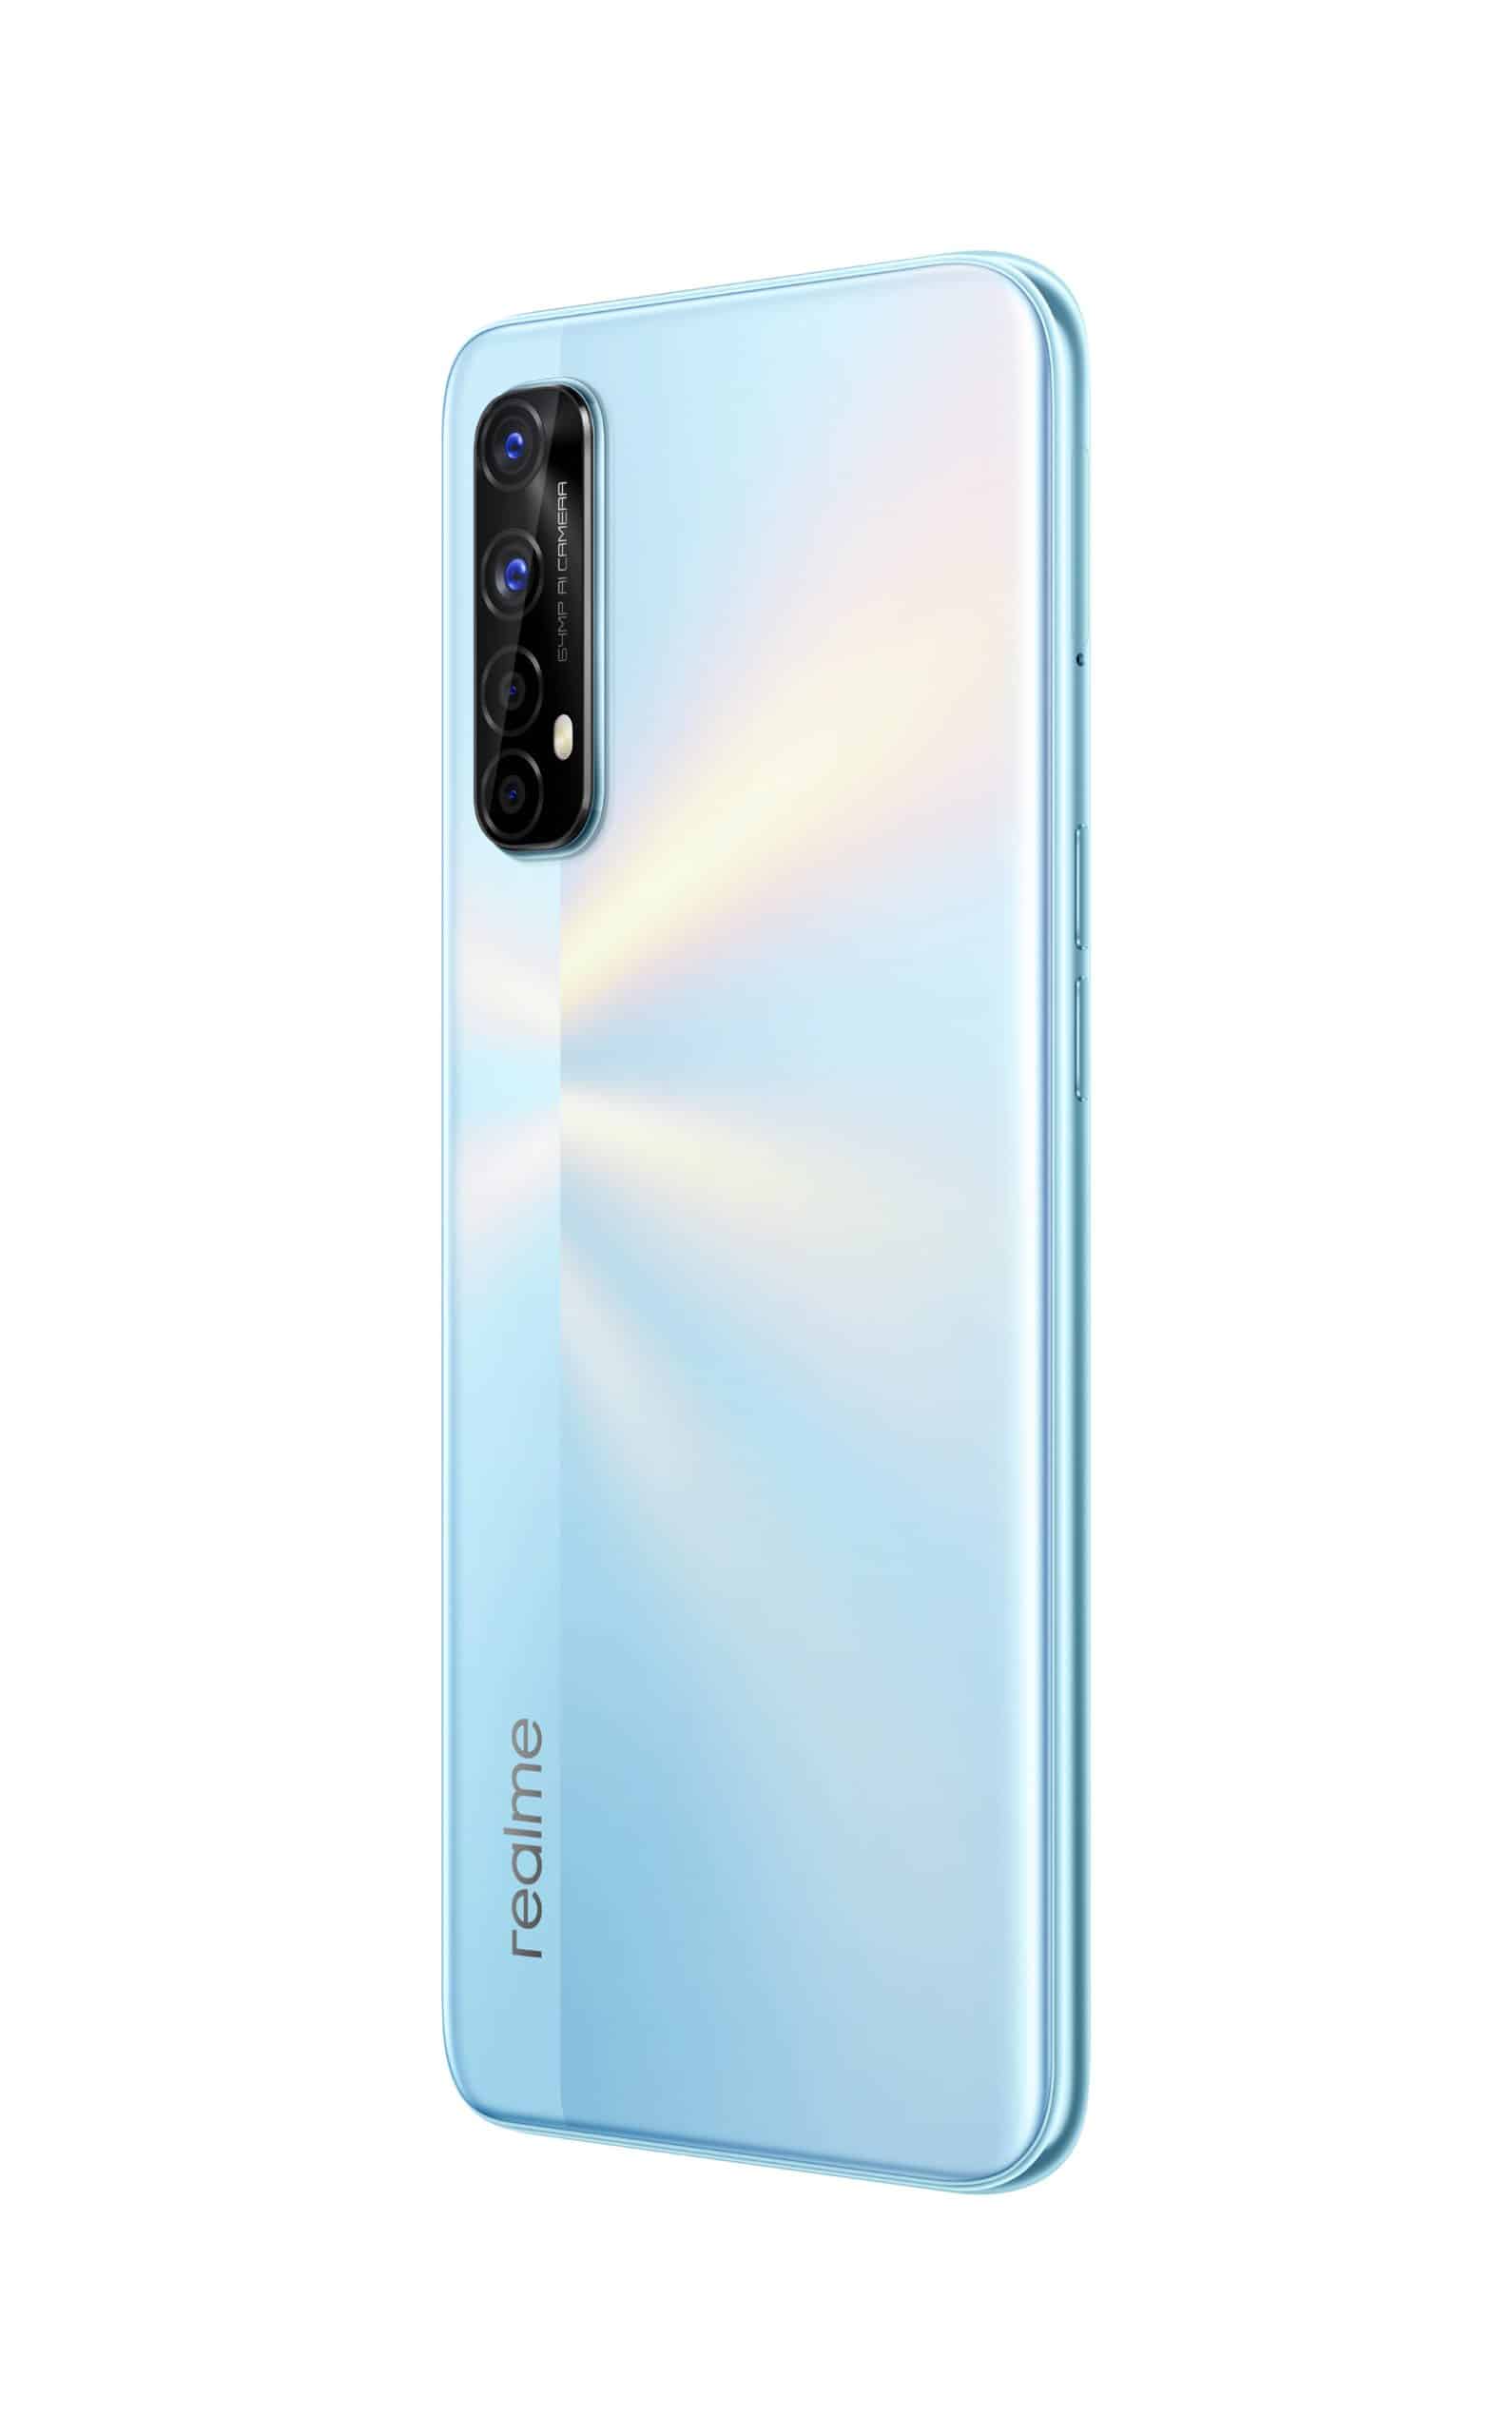 Realme launches its 7-series smartphone in the UAE